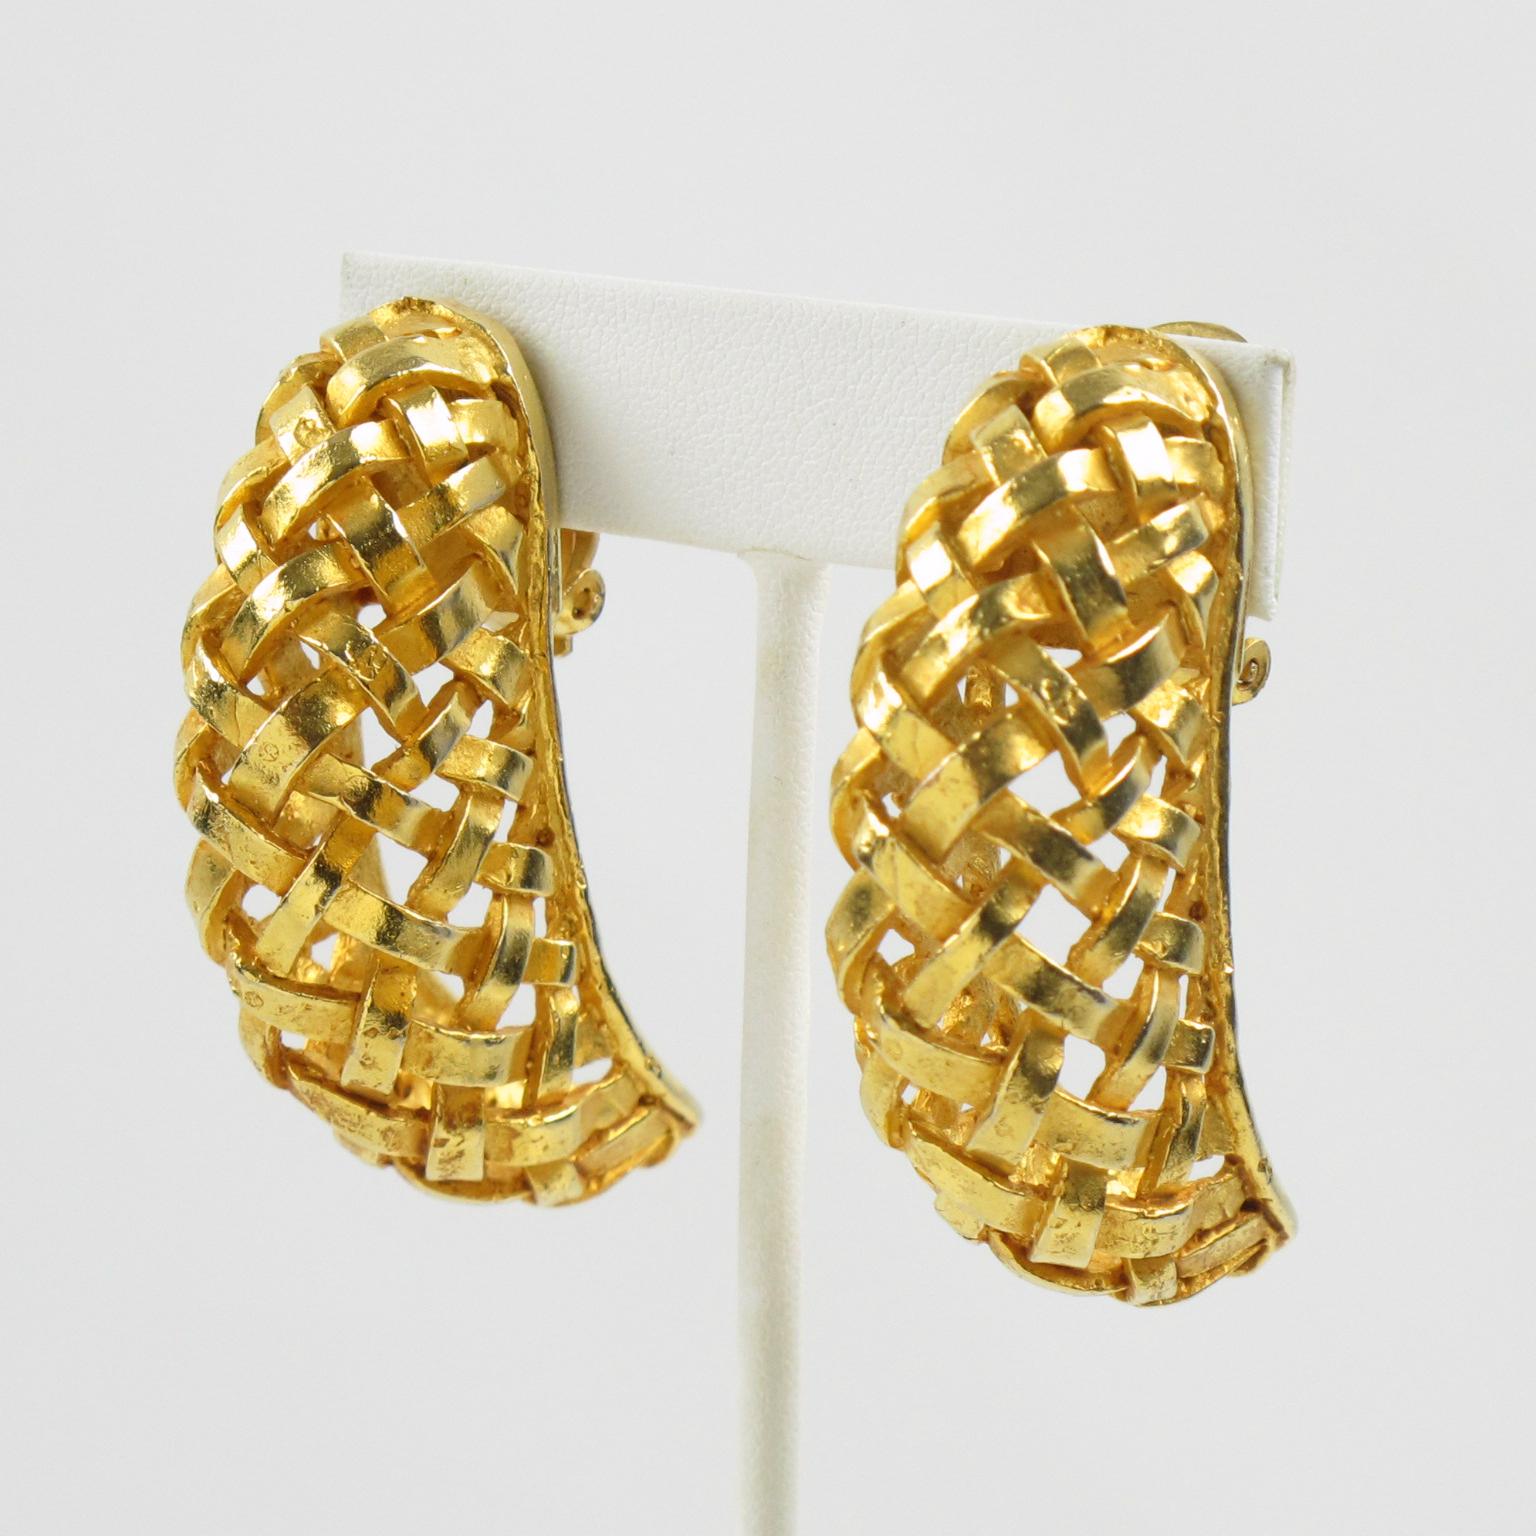 Lovely Dominique Aurientis Paris signed clip-on earrings. Features an oversized crescent shape with braided gilt metal all carved and see-thru. Signed underside with the Aurientis brand logo. The braided pattern is a favorite of the designer and has